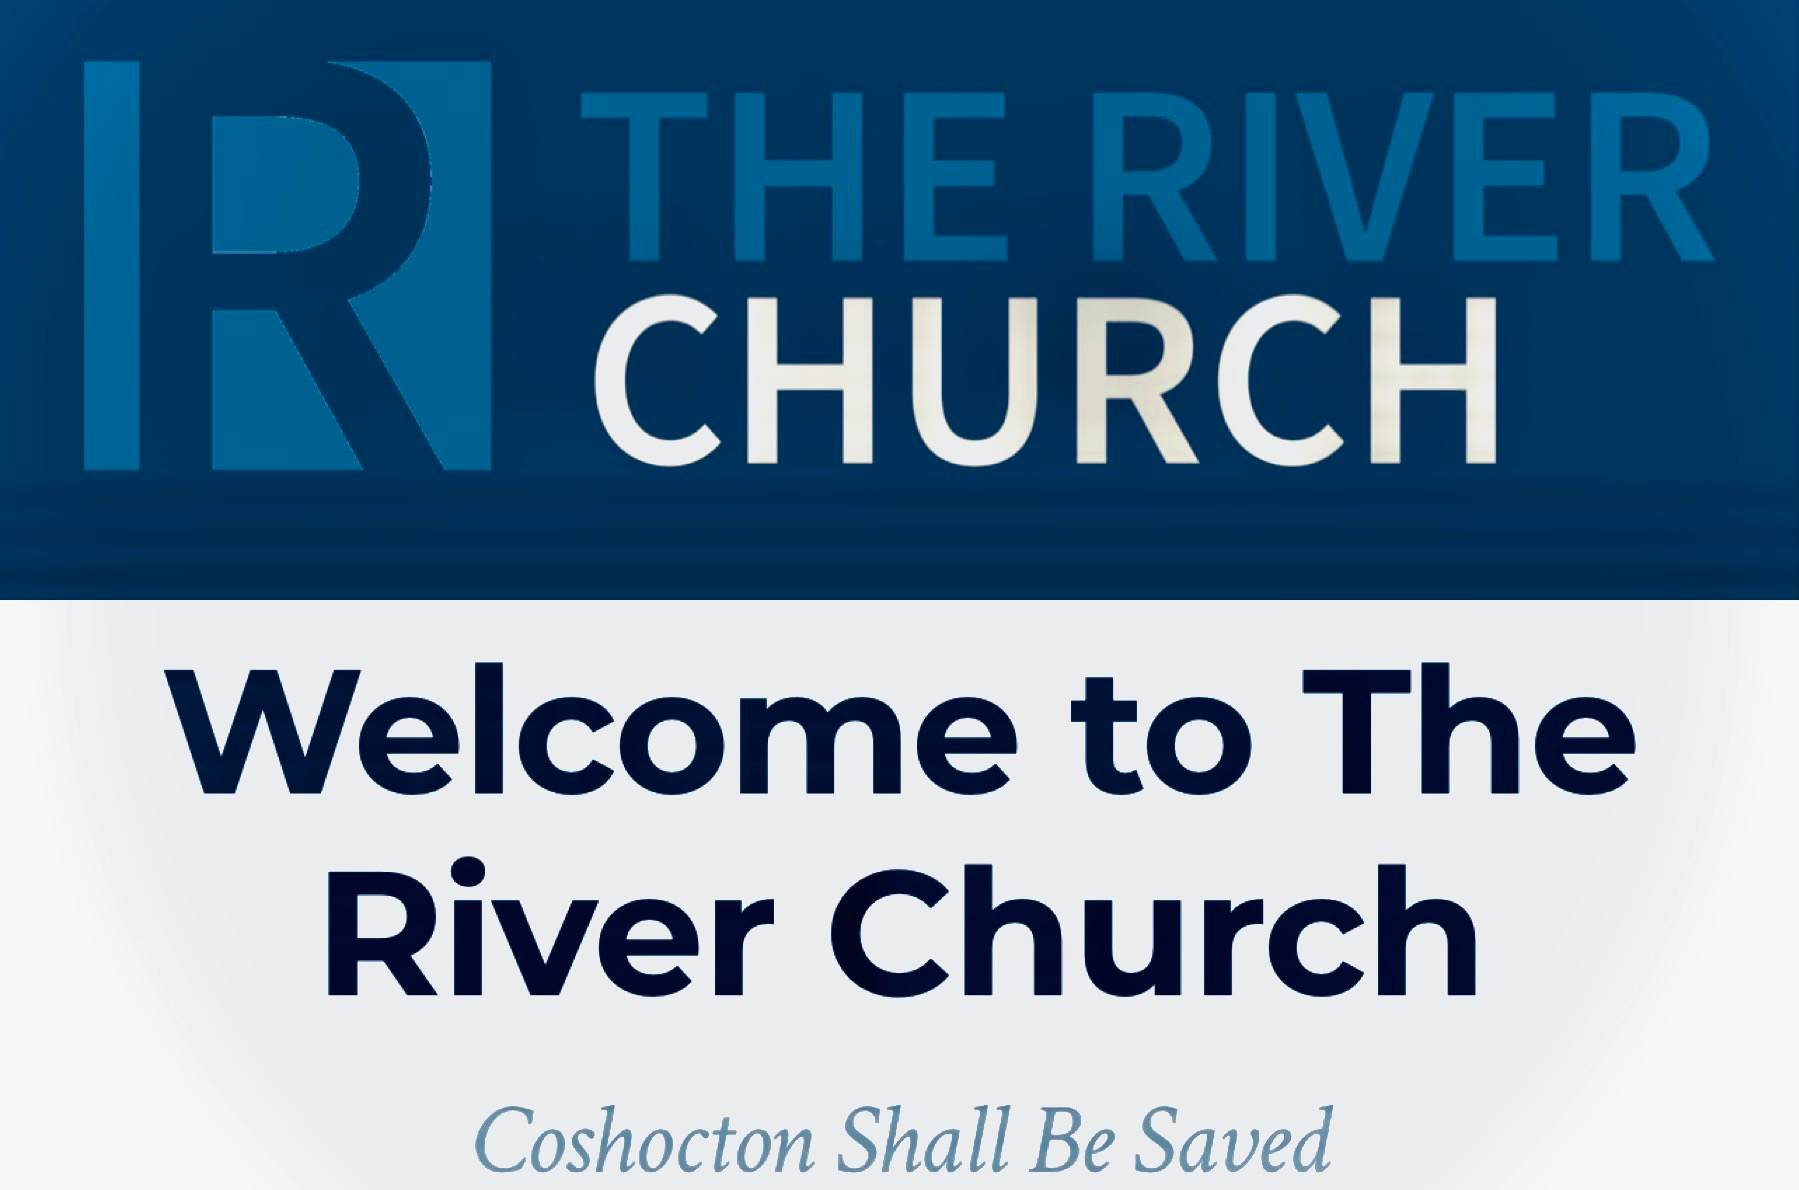 The River Church Coshocton Logo